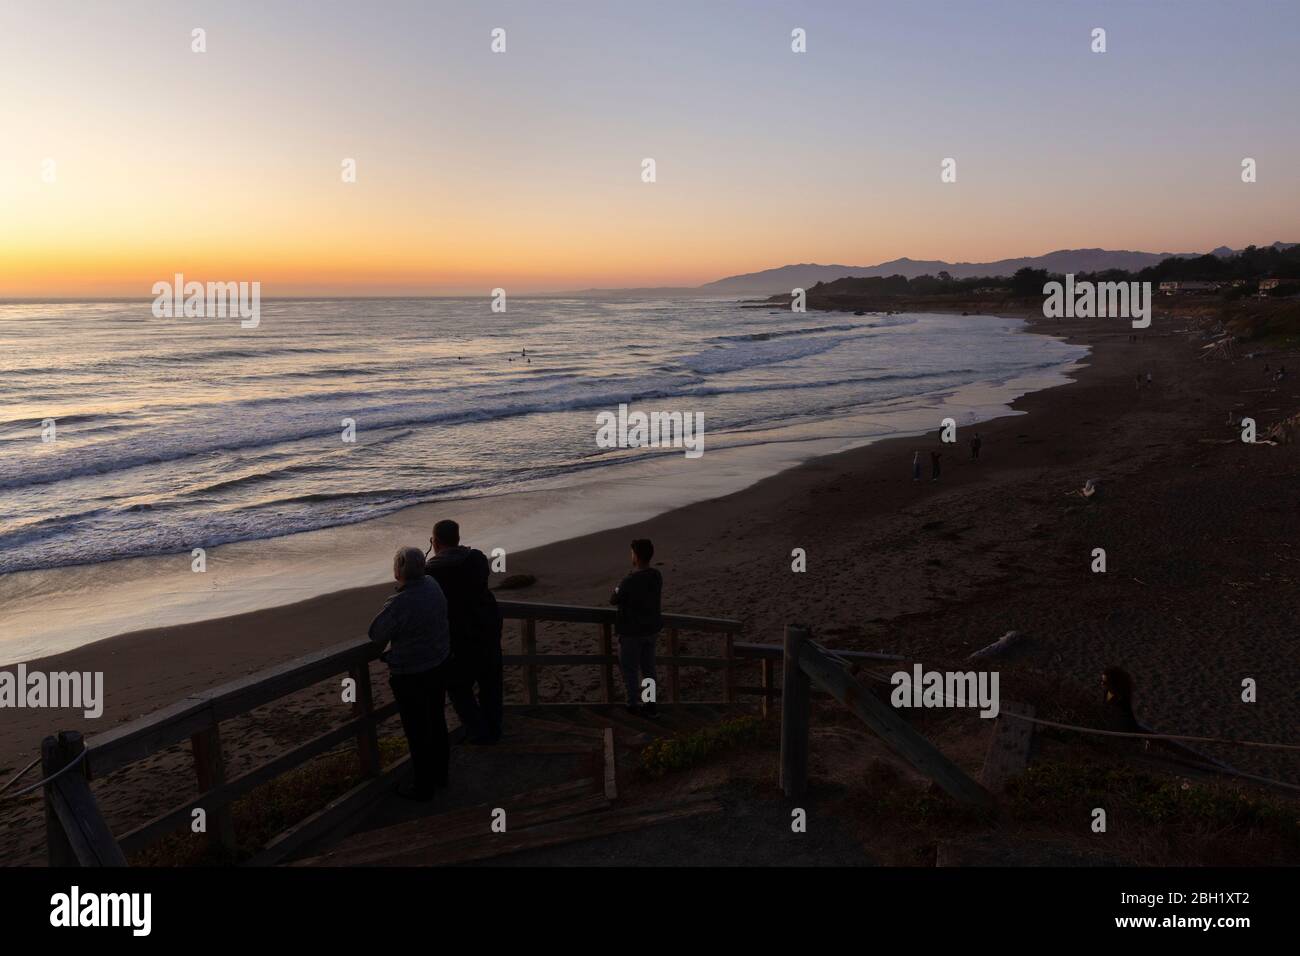 CAMBRIA, UNITED STATES - SEPTEMBER 21, 2019 : Sunset at Moonstone beach on the Californian coast with people watching the evening surfers. Stock Photo